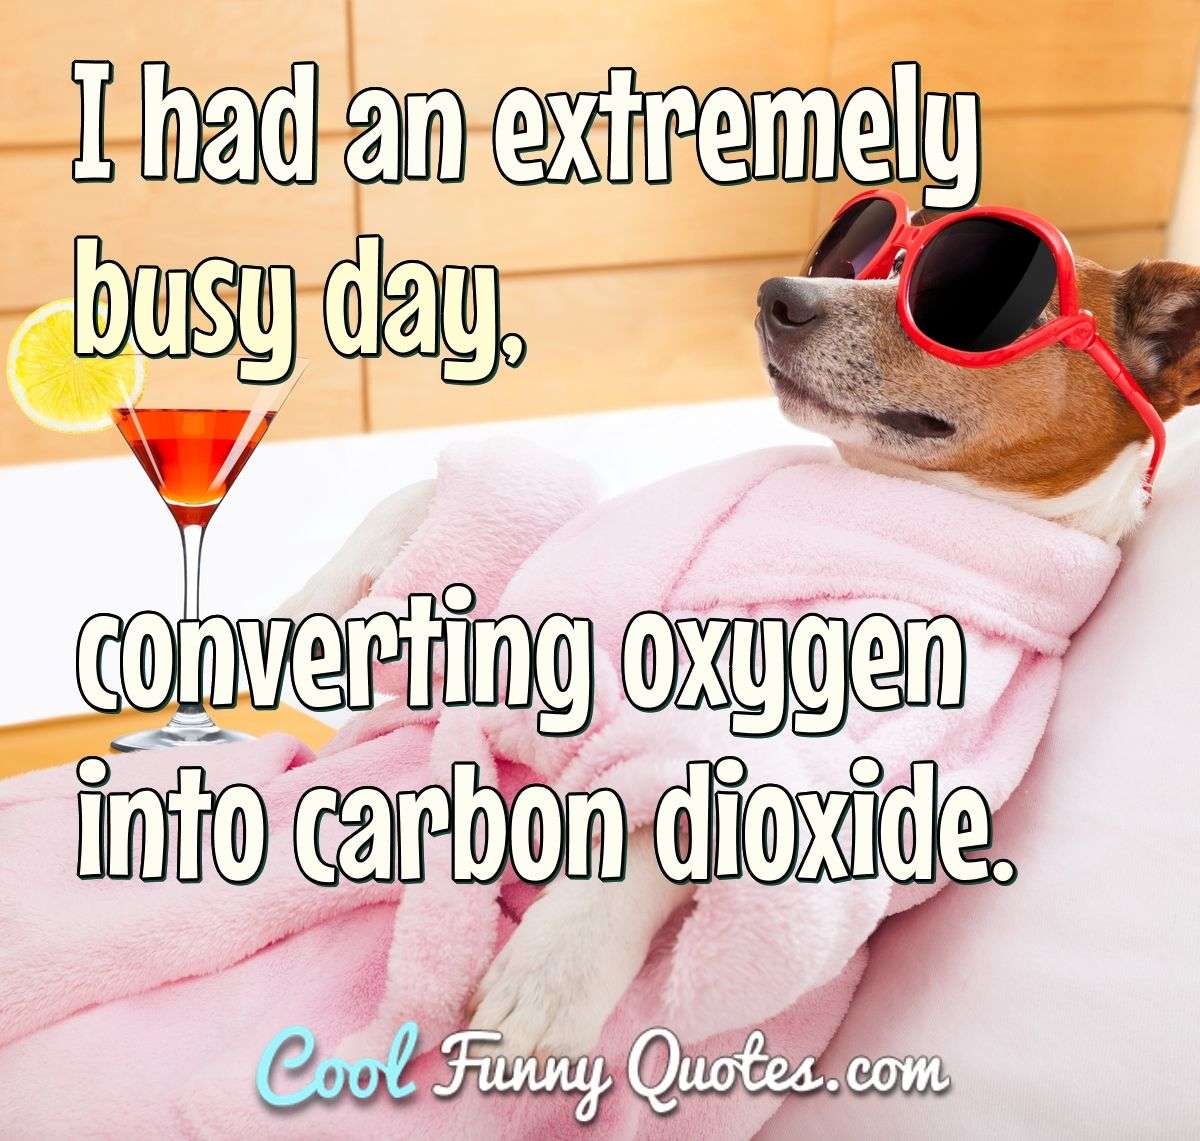 I had an extremely busy day, converting oxygen into carbon dioxide. - Anonymous